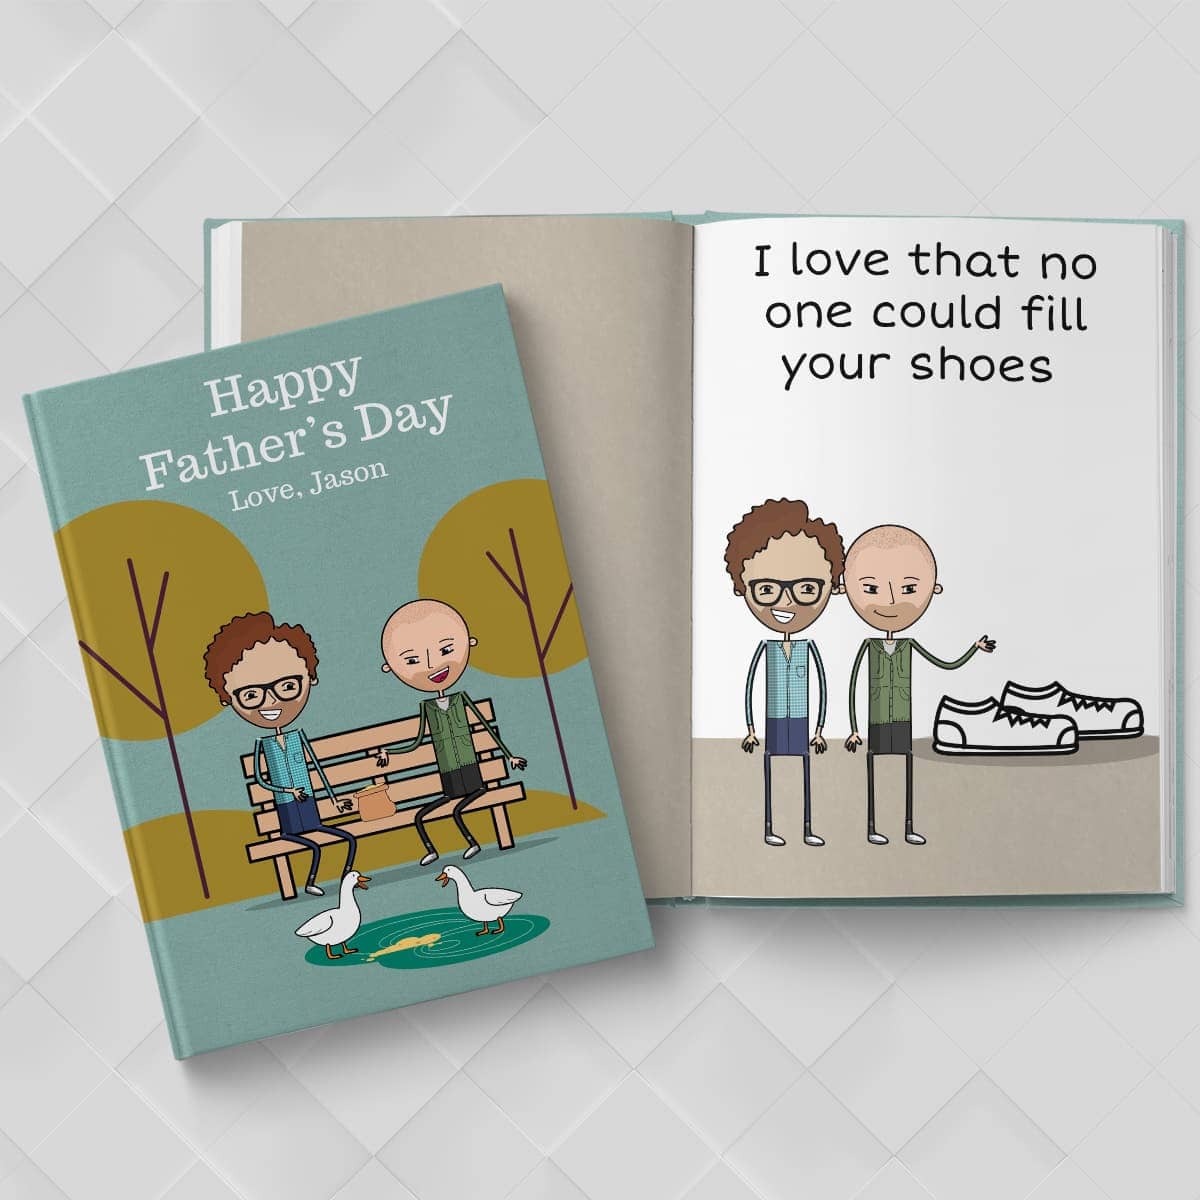 Fathers Day Gifts by LoveBook | The Personalized Gift Book That Says Why You Love Someone | LoveBook Online - 0